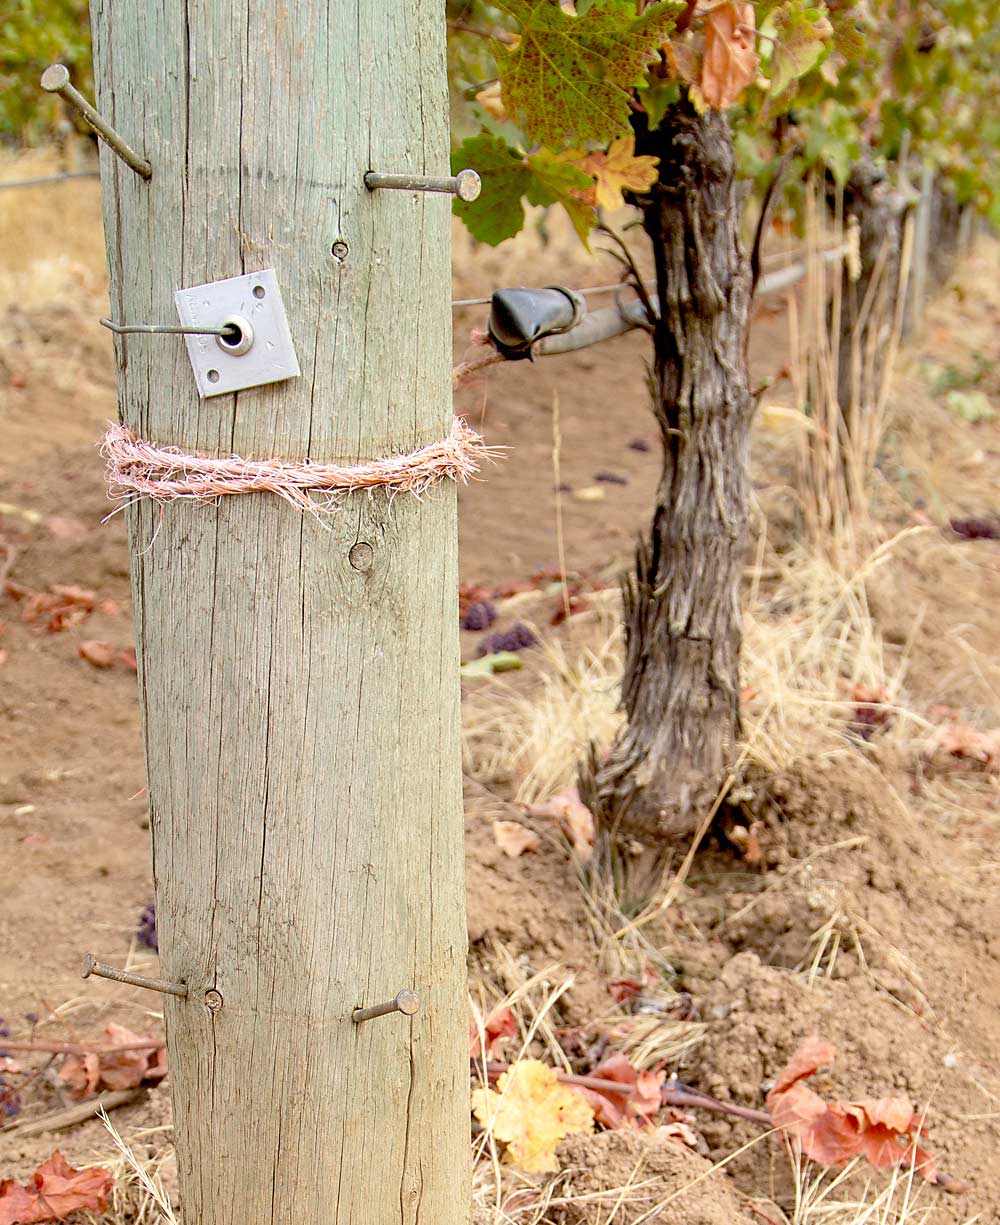 Nails in posts serve to keep the catch wires and irrigation tubing out of the mechanical weed cultivator’s path. The extra labor to add nails to all their wood posts was one of the unanticipated costs of Adelsheim’s decision to stop spraying herbicides. (Jonelle Mejica/Good Fruit Grower)